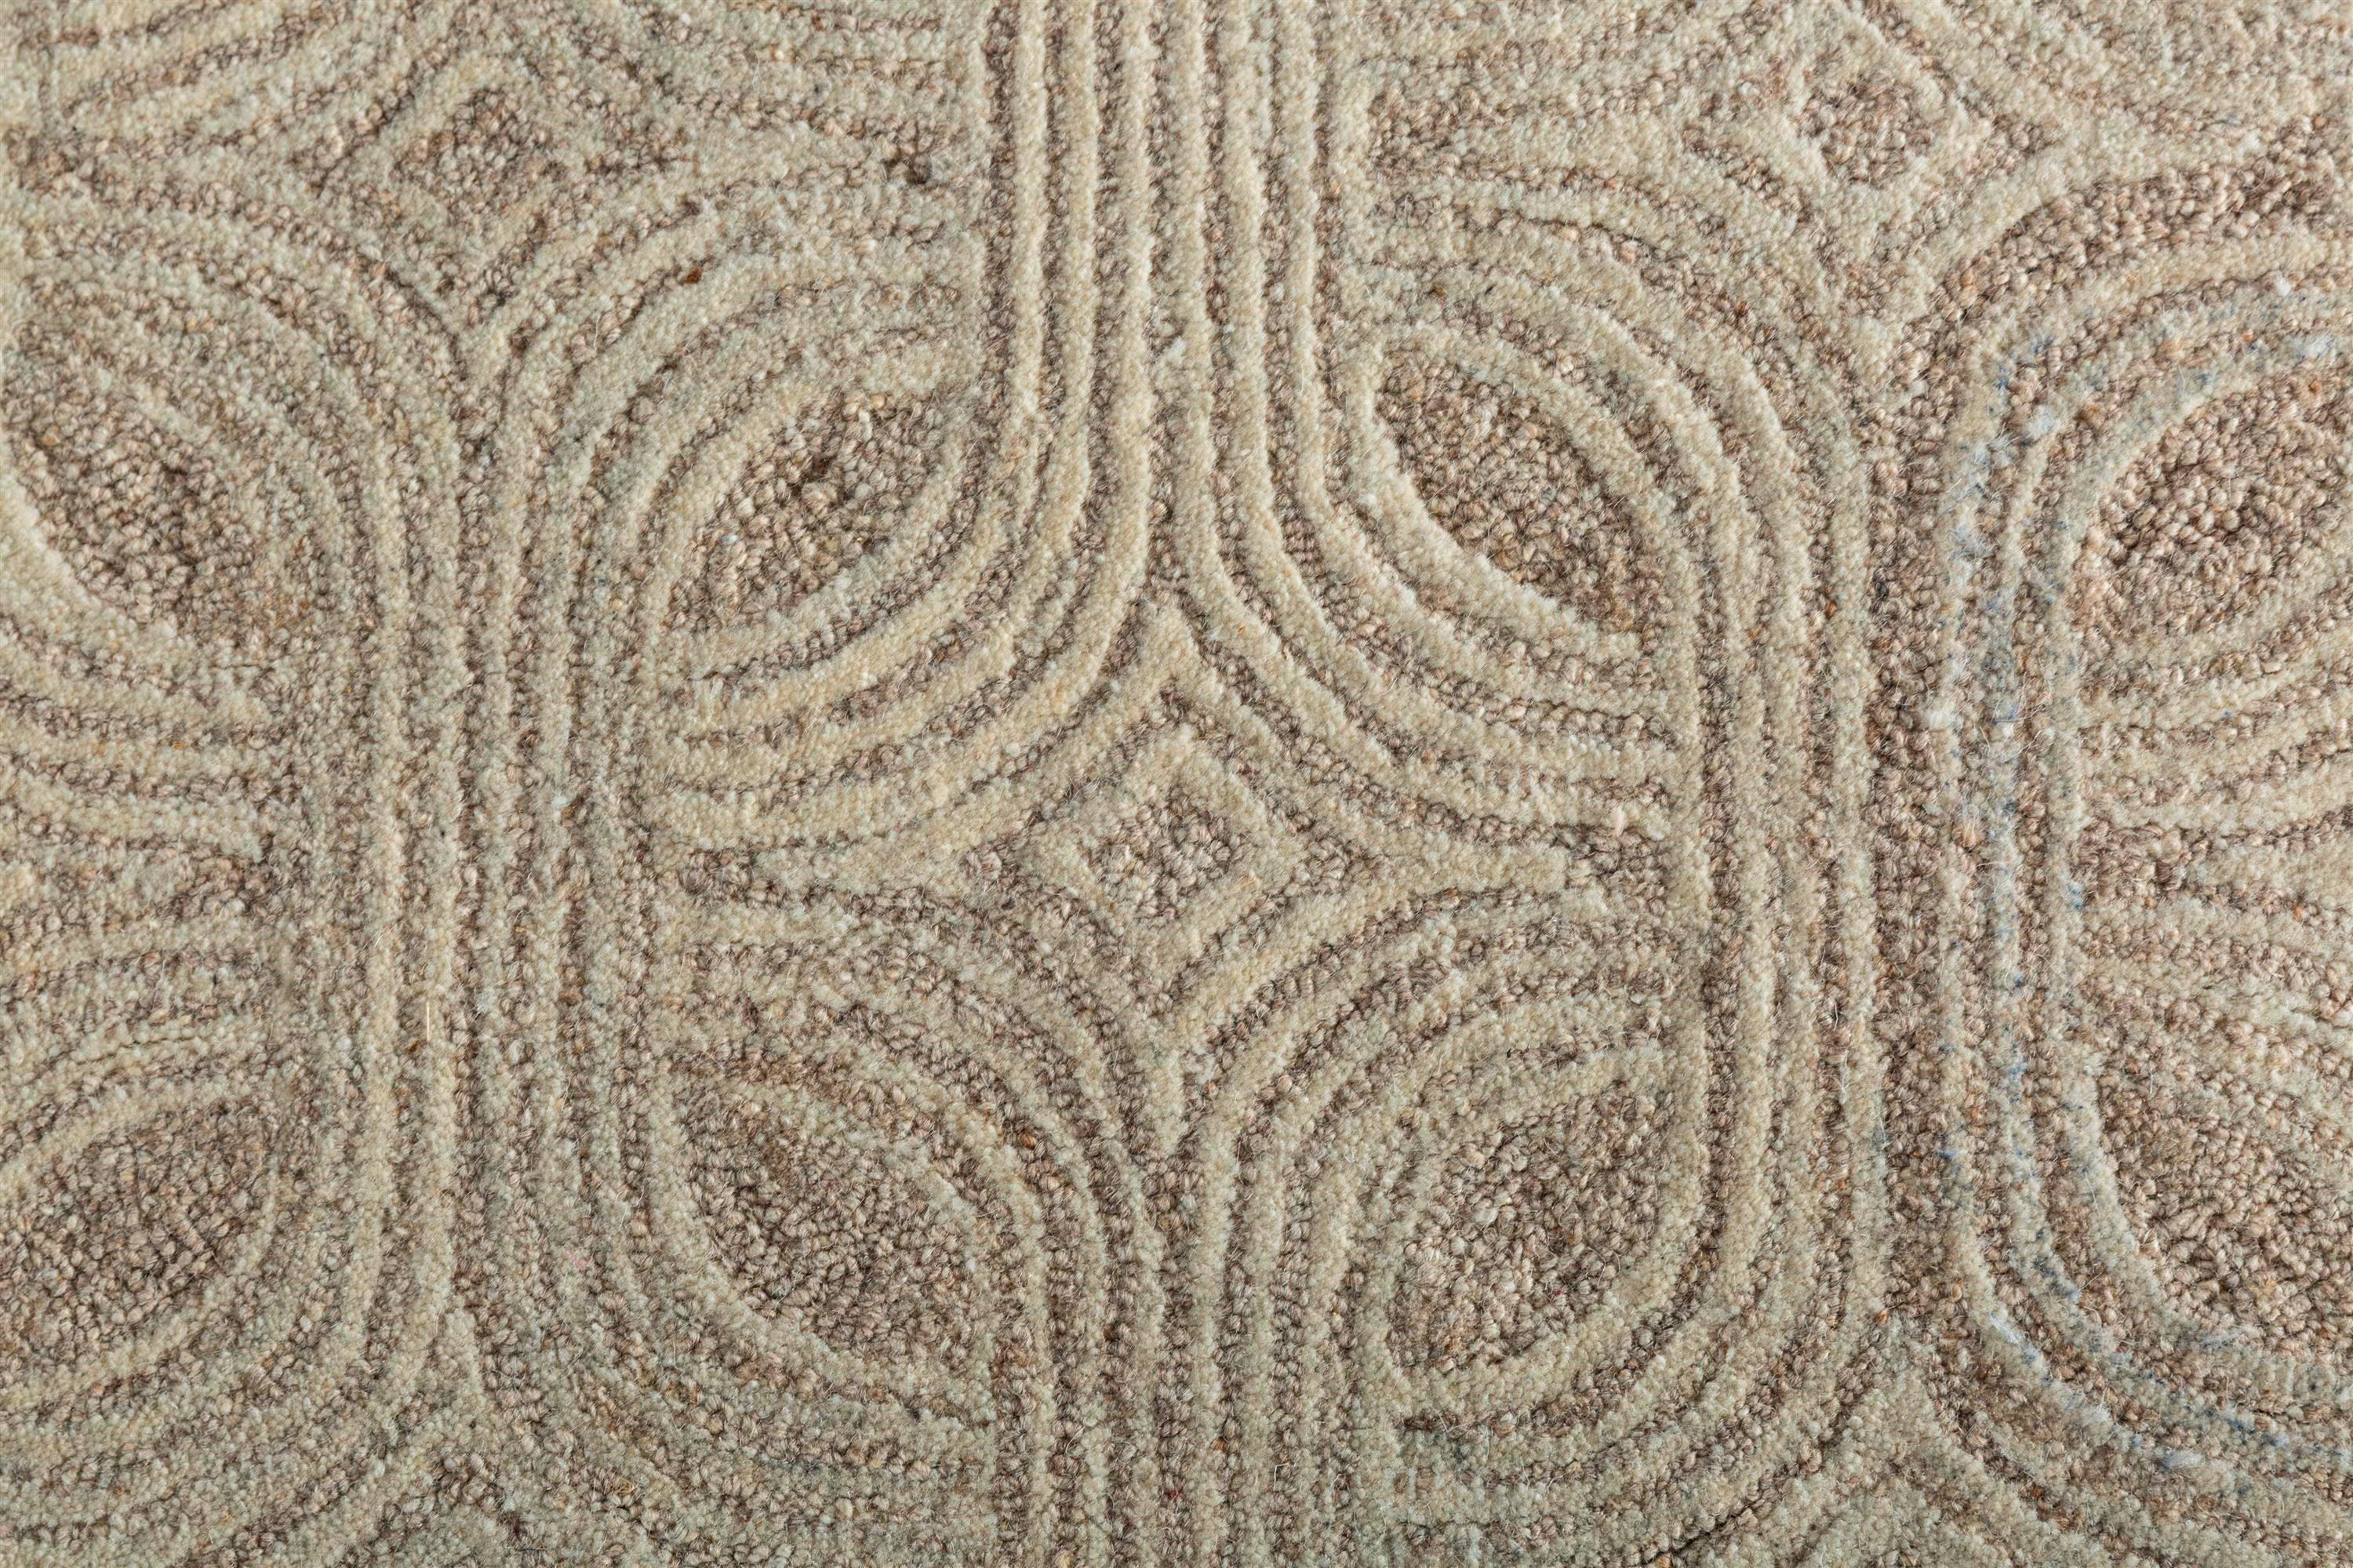 Introducing our modern, hand-tufted rug—a work of art crafted from quality wool, resulting in a dimensional and organic-inspired aesthetic. The  beautiful rug, with its Art Deco-inspired motif, captivates with a structural and intriguing repeat